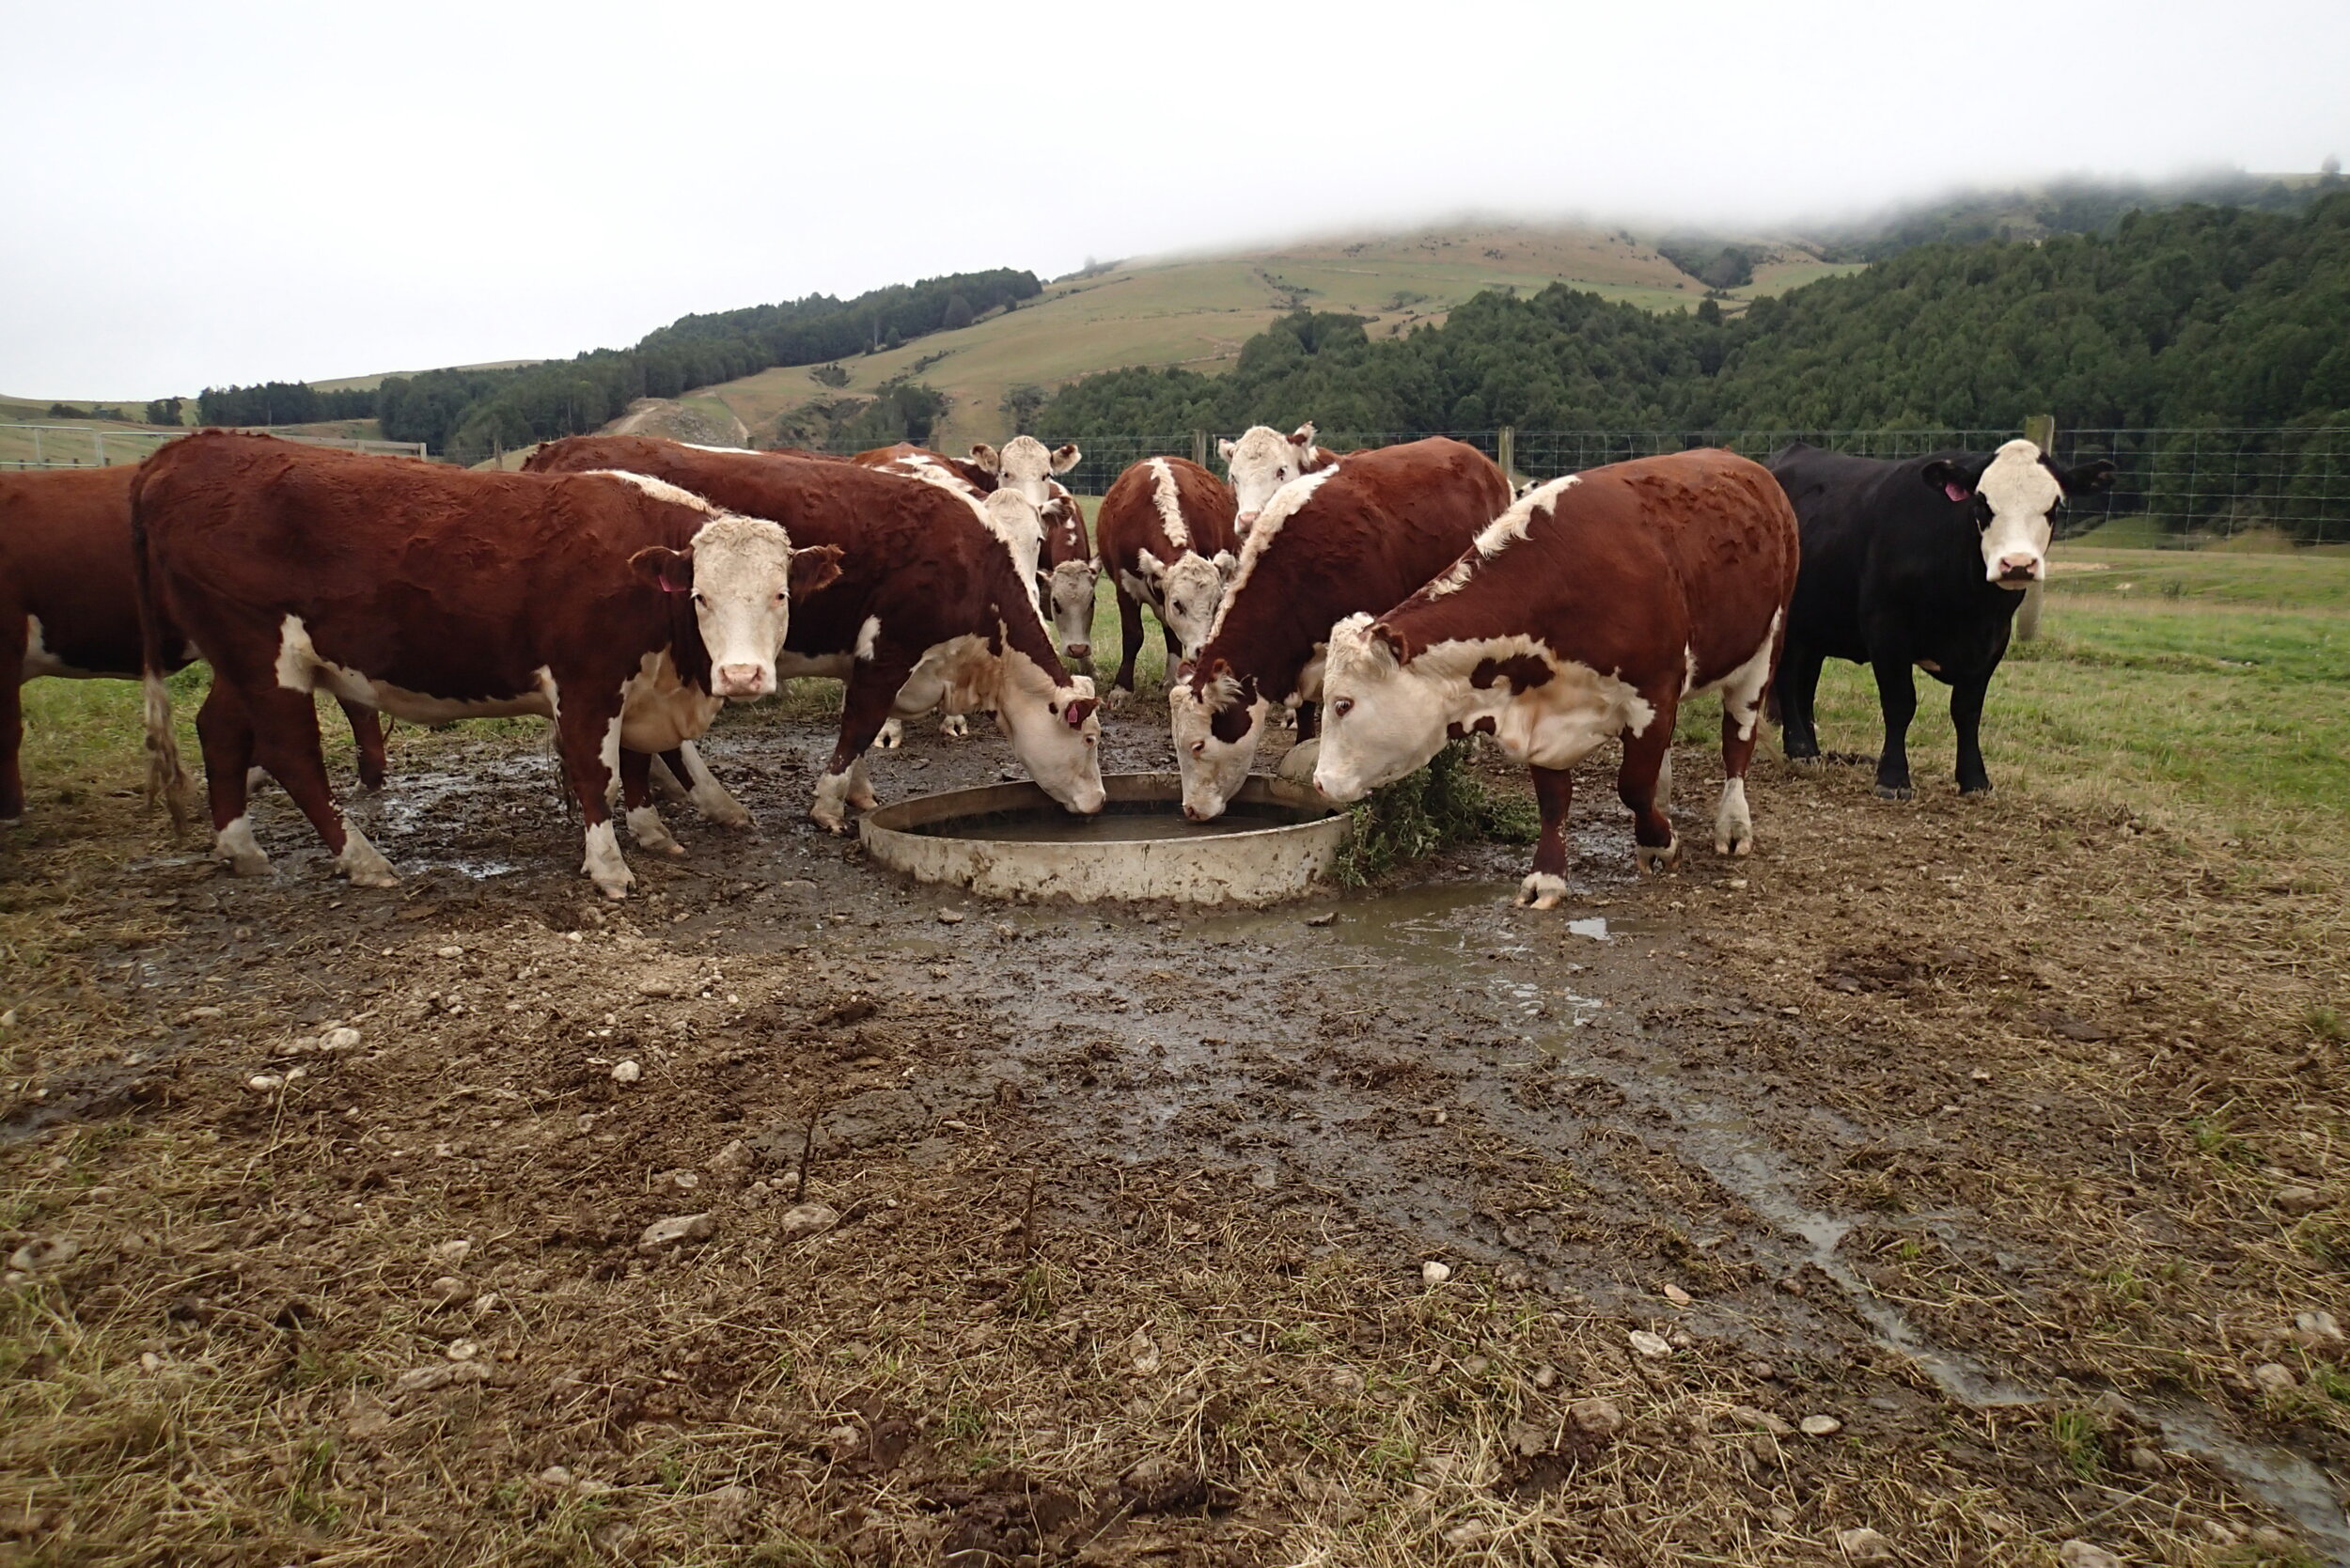 trough cleaned and cattle are keen for some clean drinking water